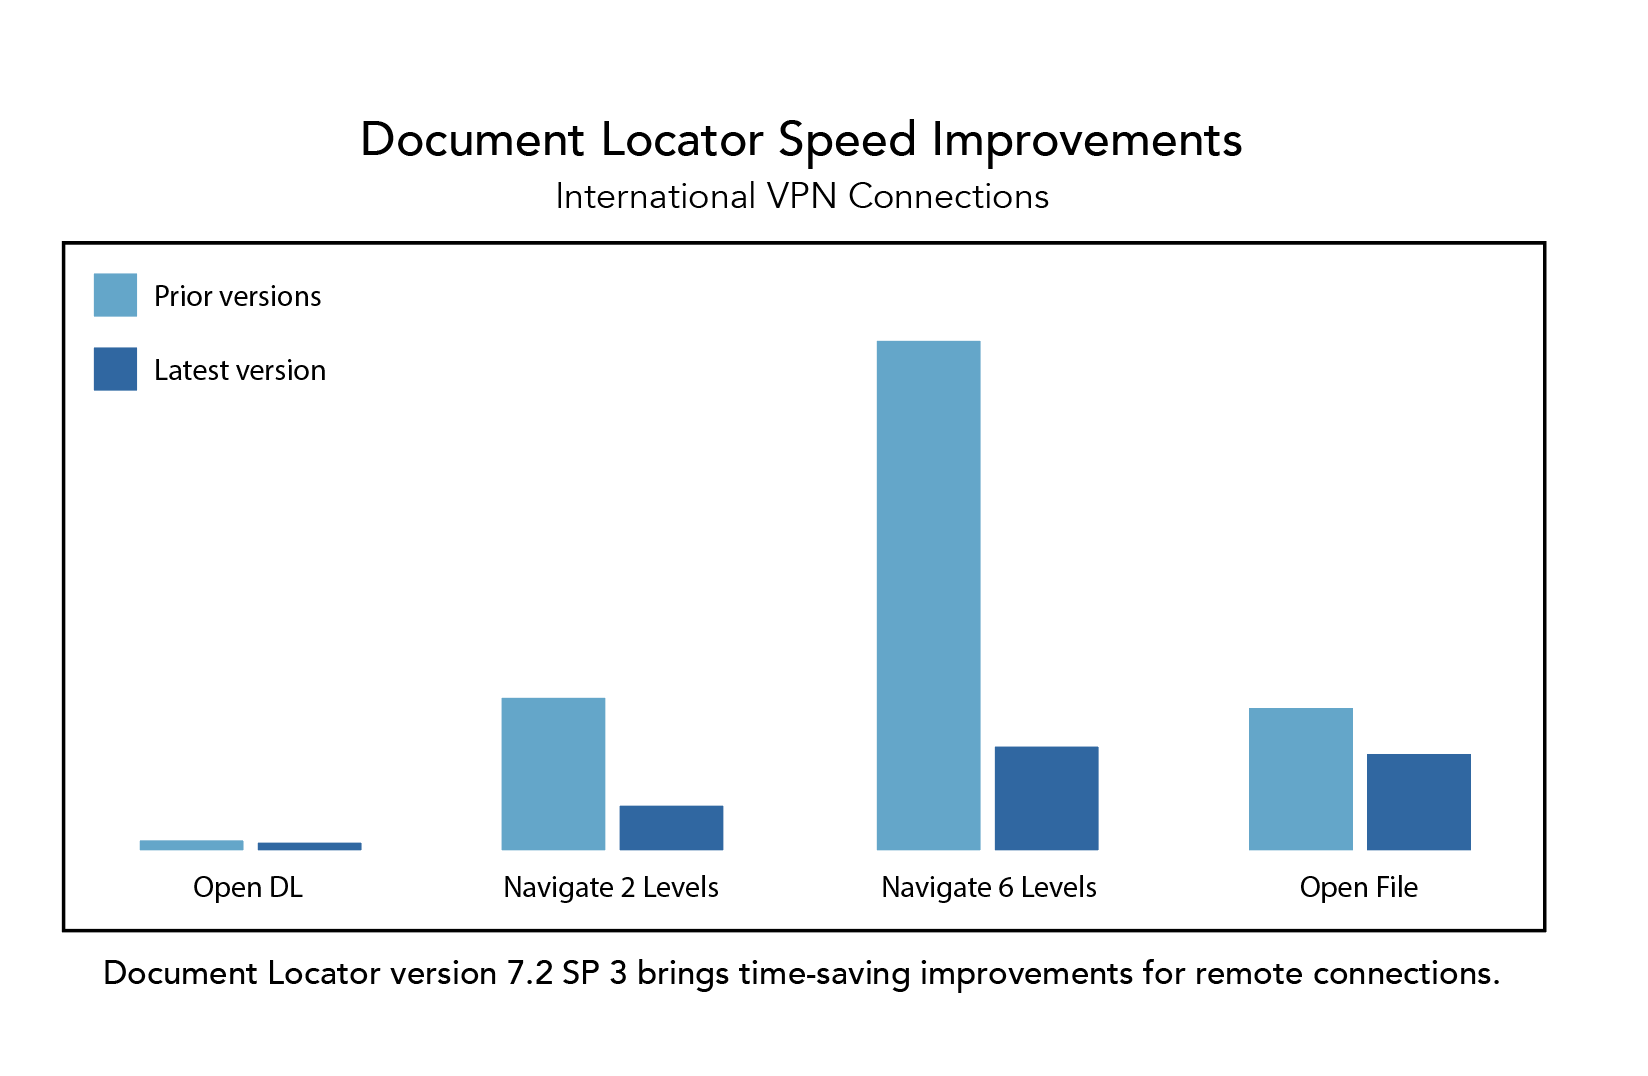 Document Management Software with Faster Remote Connections - Document Locator